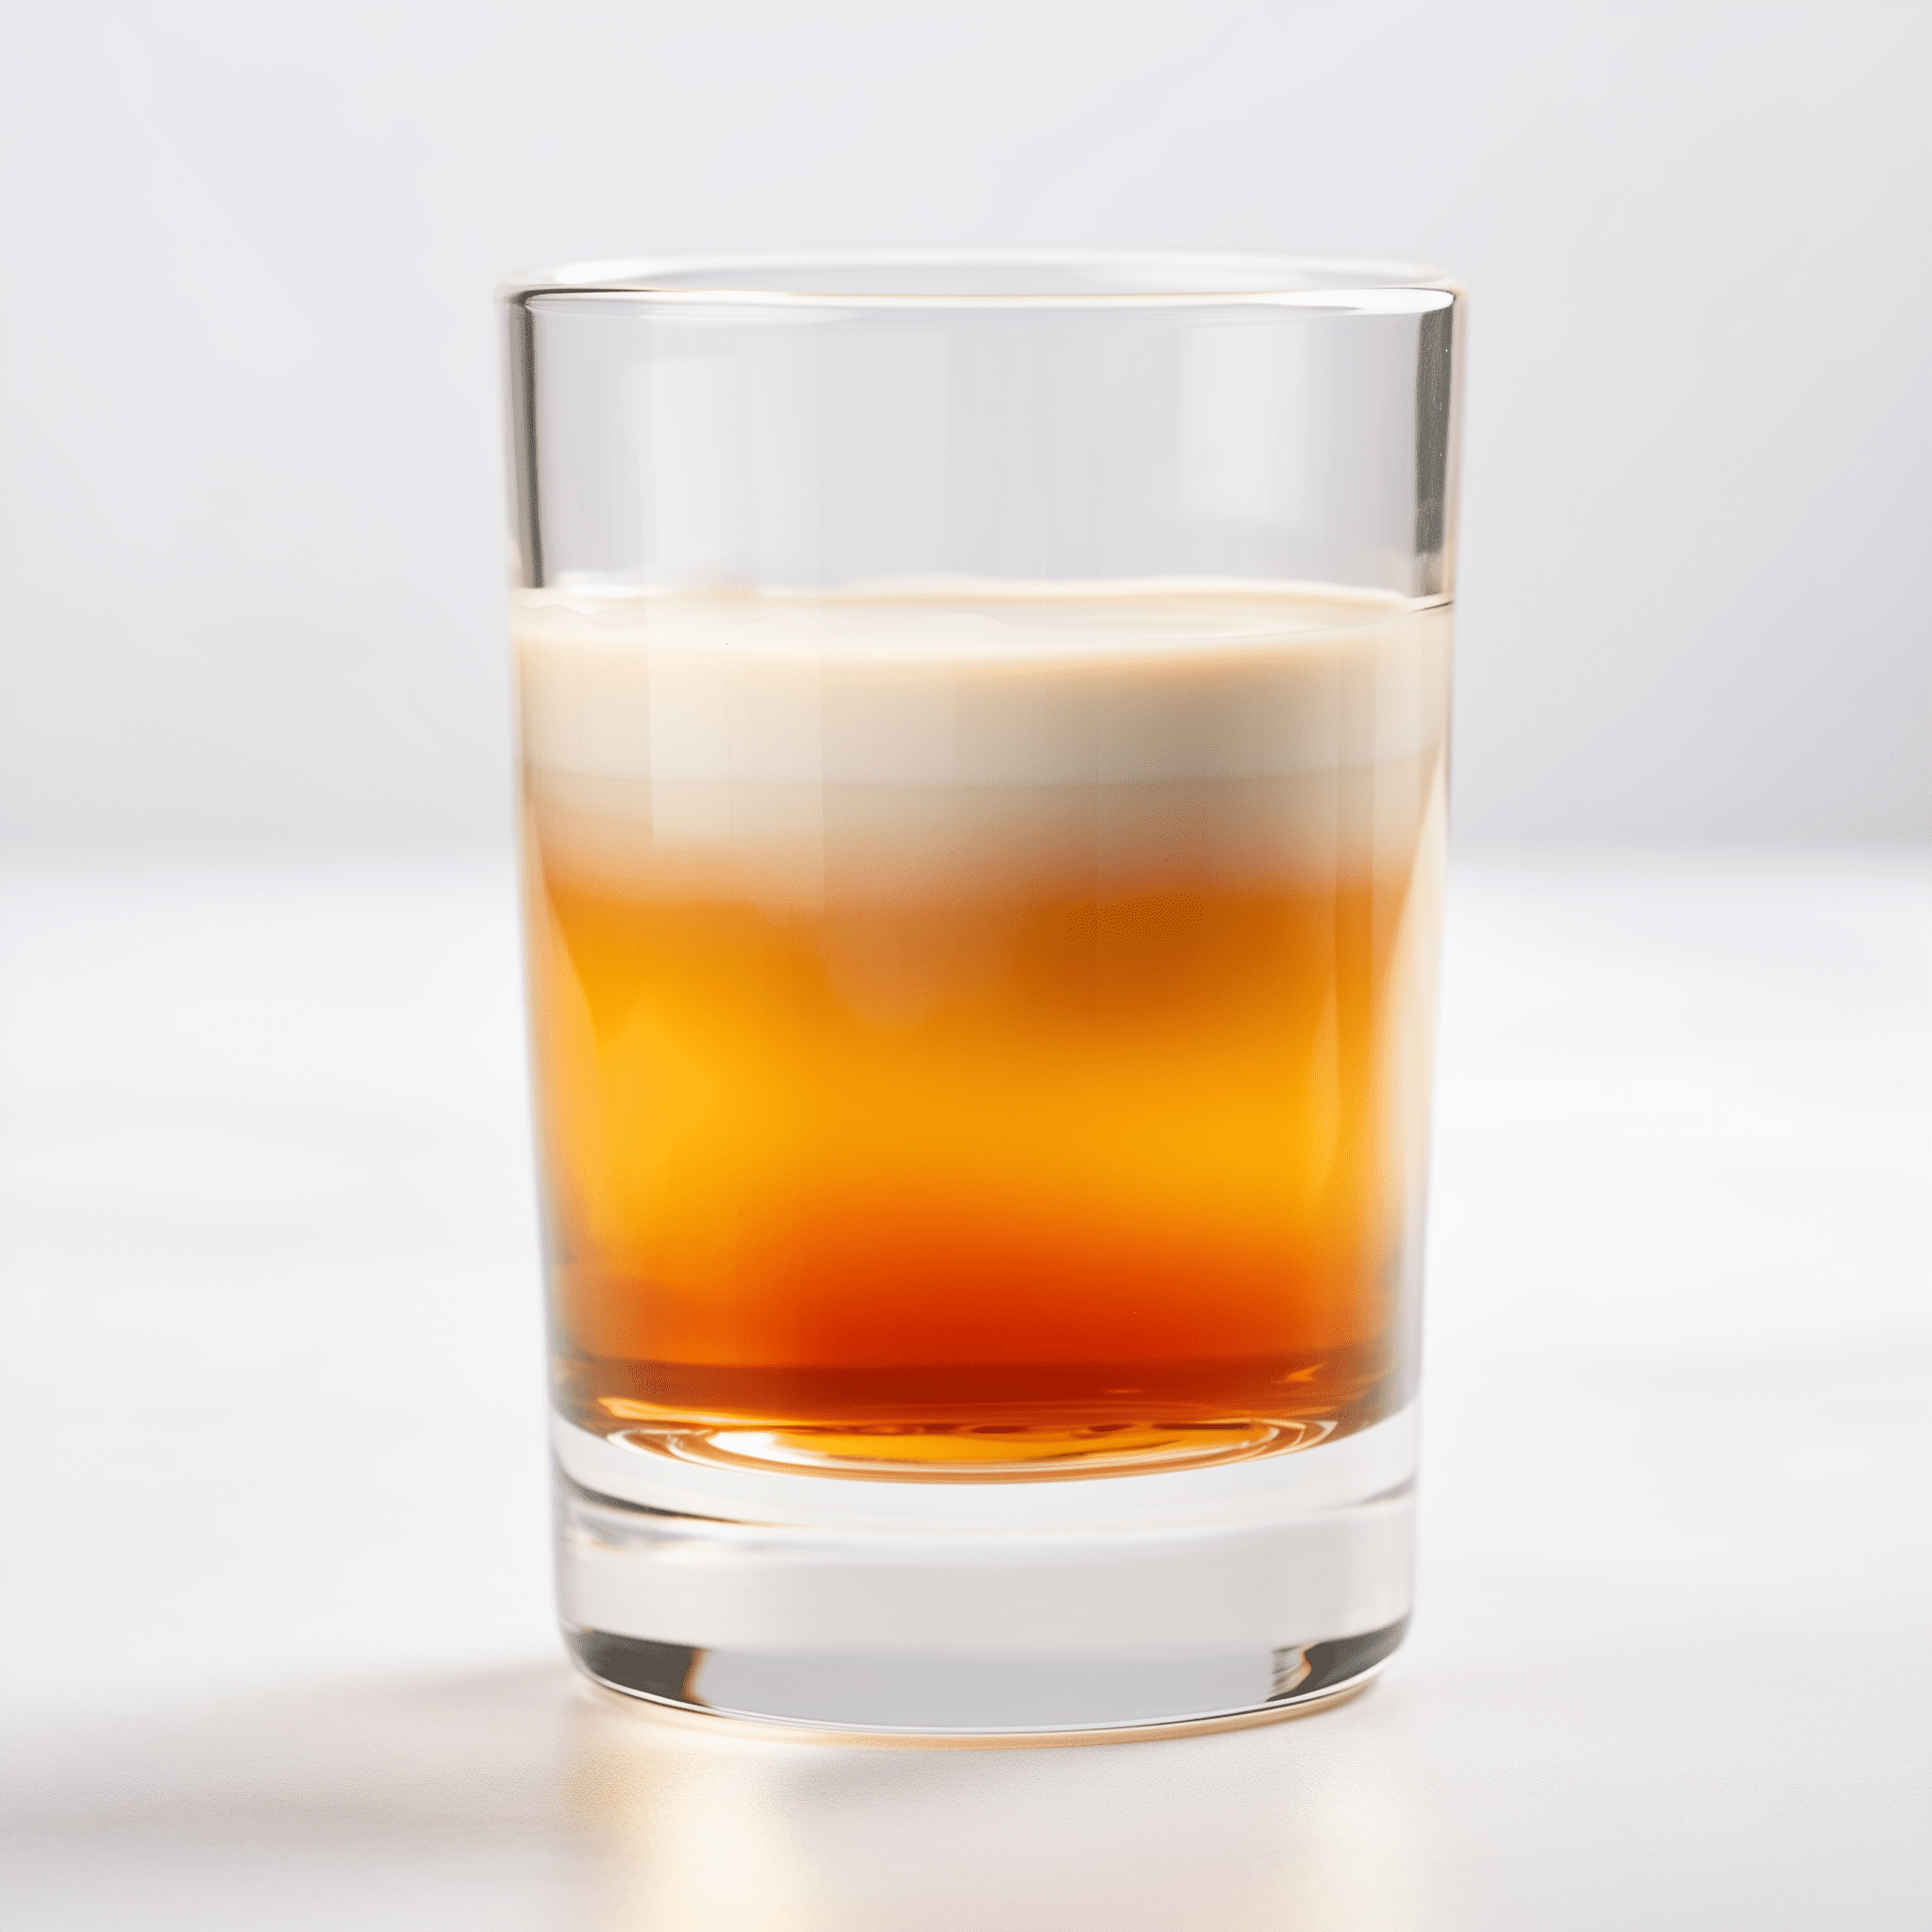 Buttery Crown Cocktail Recipe - The Buttery Crown offers a rich, velvety texture with a harmonious blend of sweetness and the warming bite of whisky. The butterscotch provides a buttery, caramel flavor that is both comforting and indulgent.